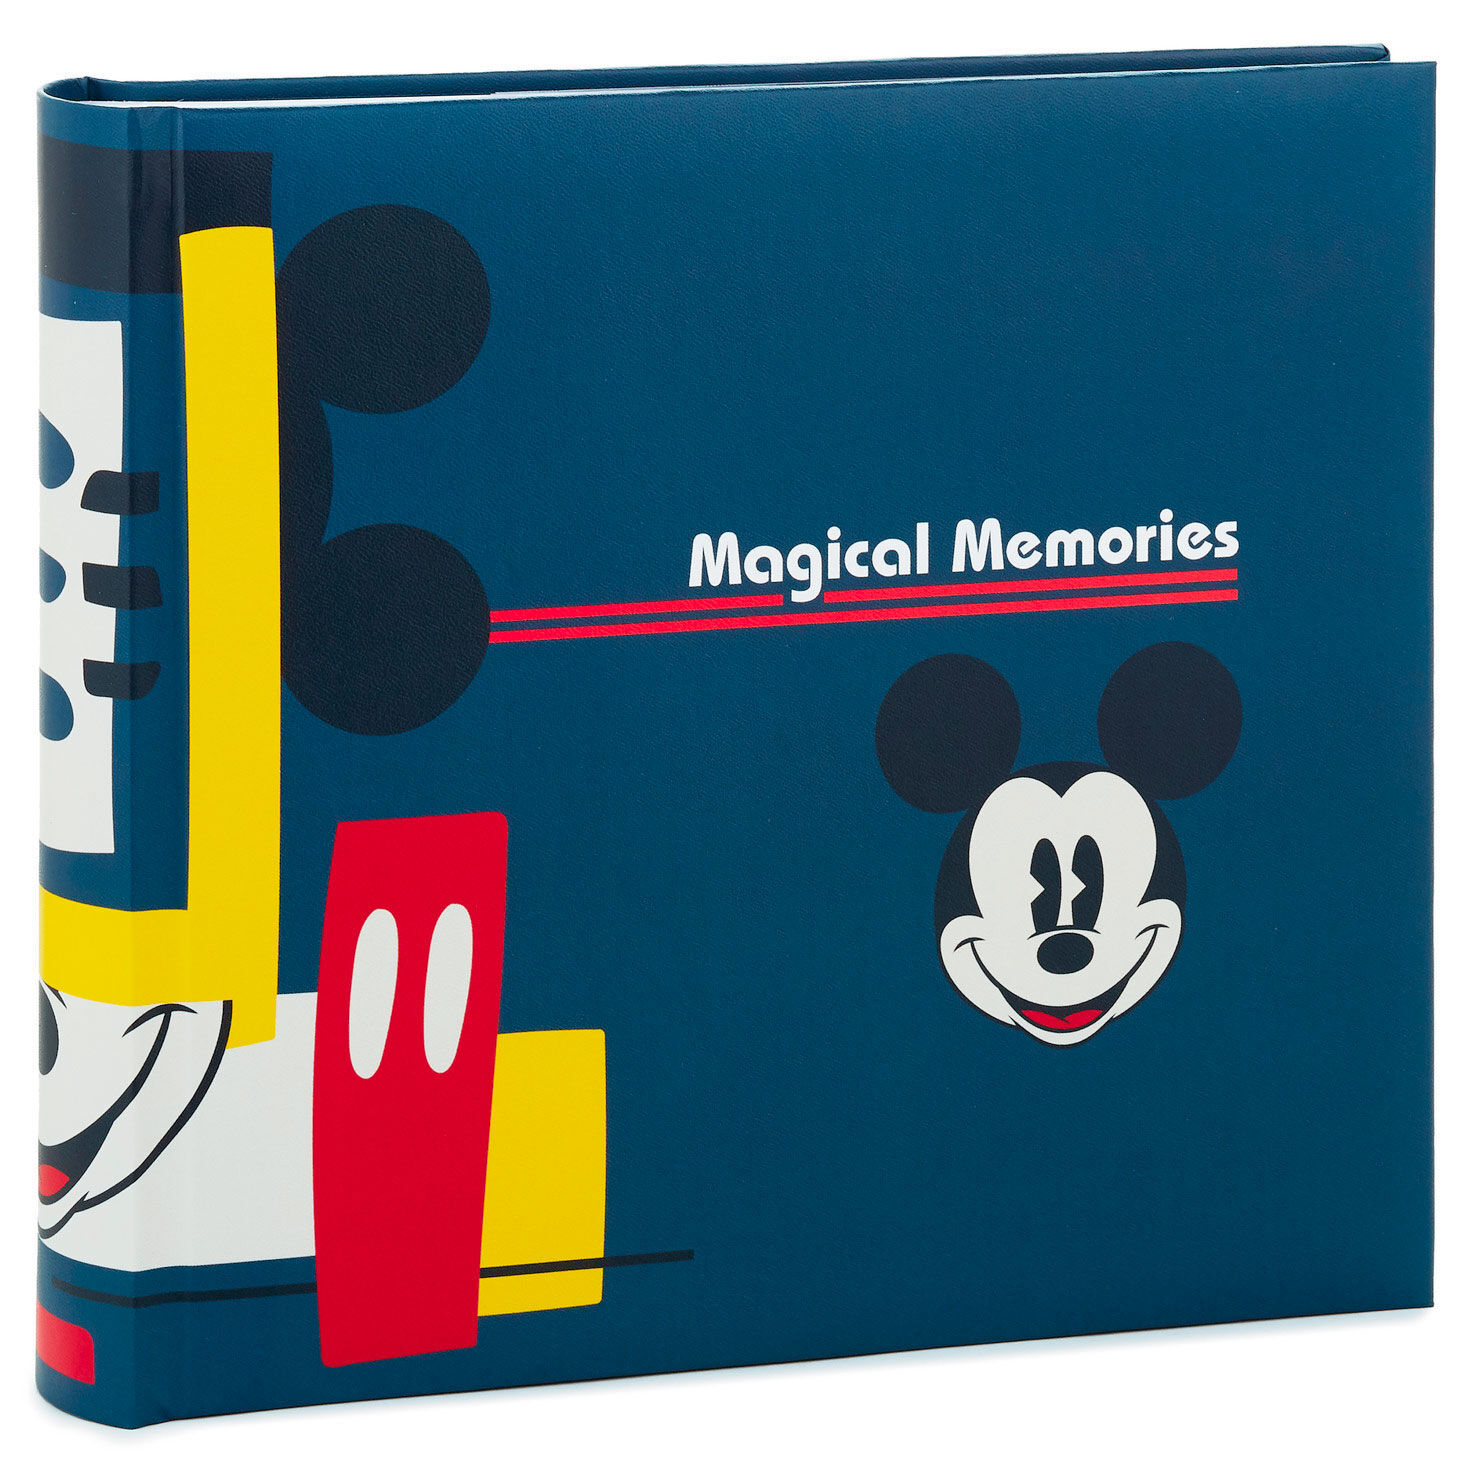 You Will Be Making Memories With This Walt Disney World Photo Album 